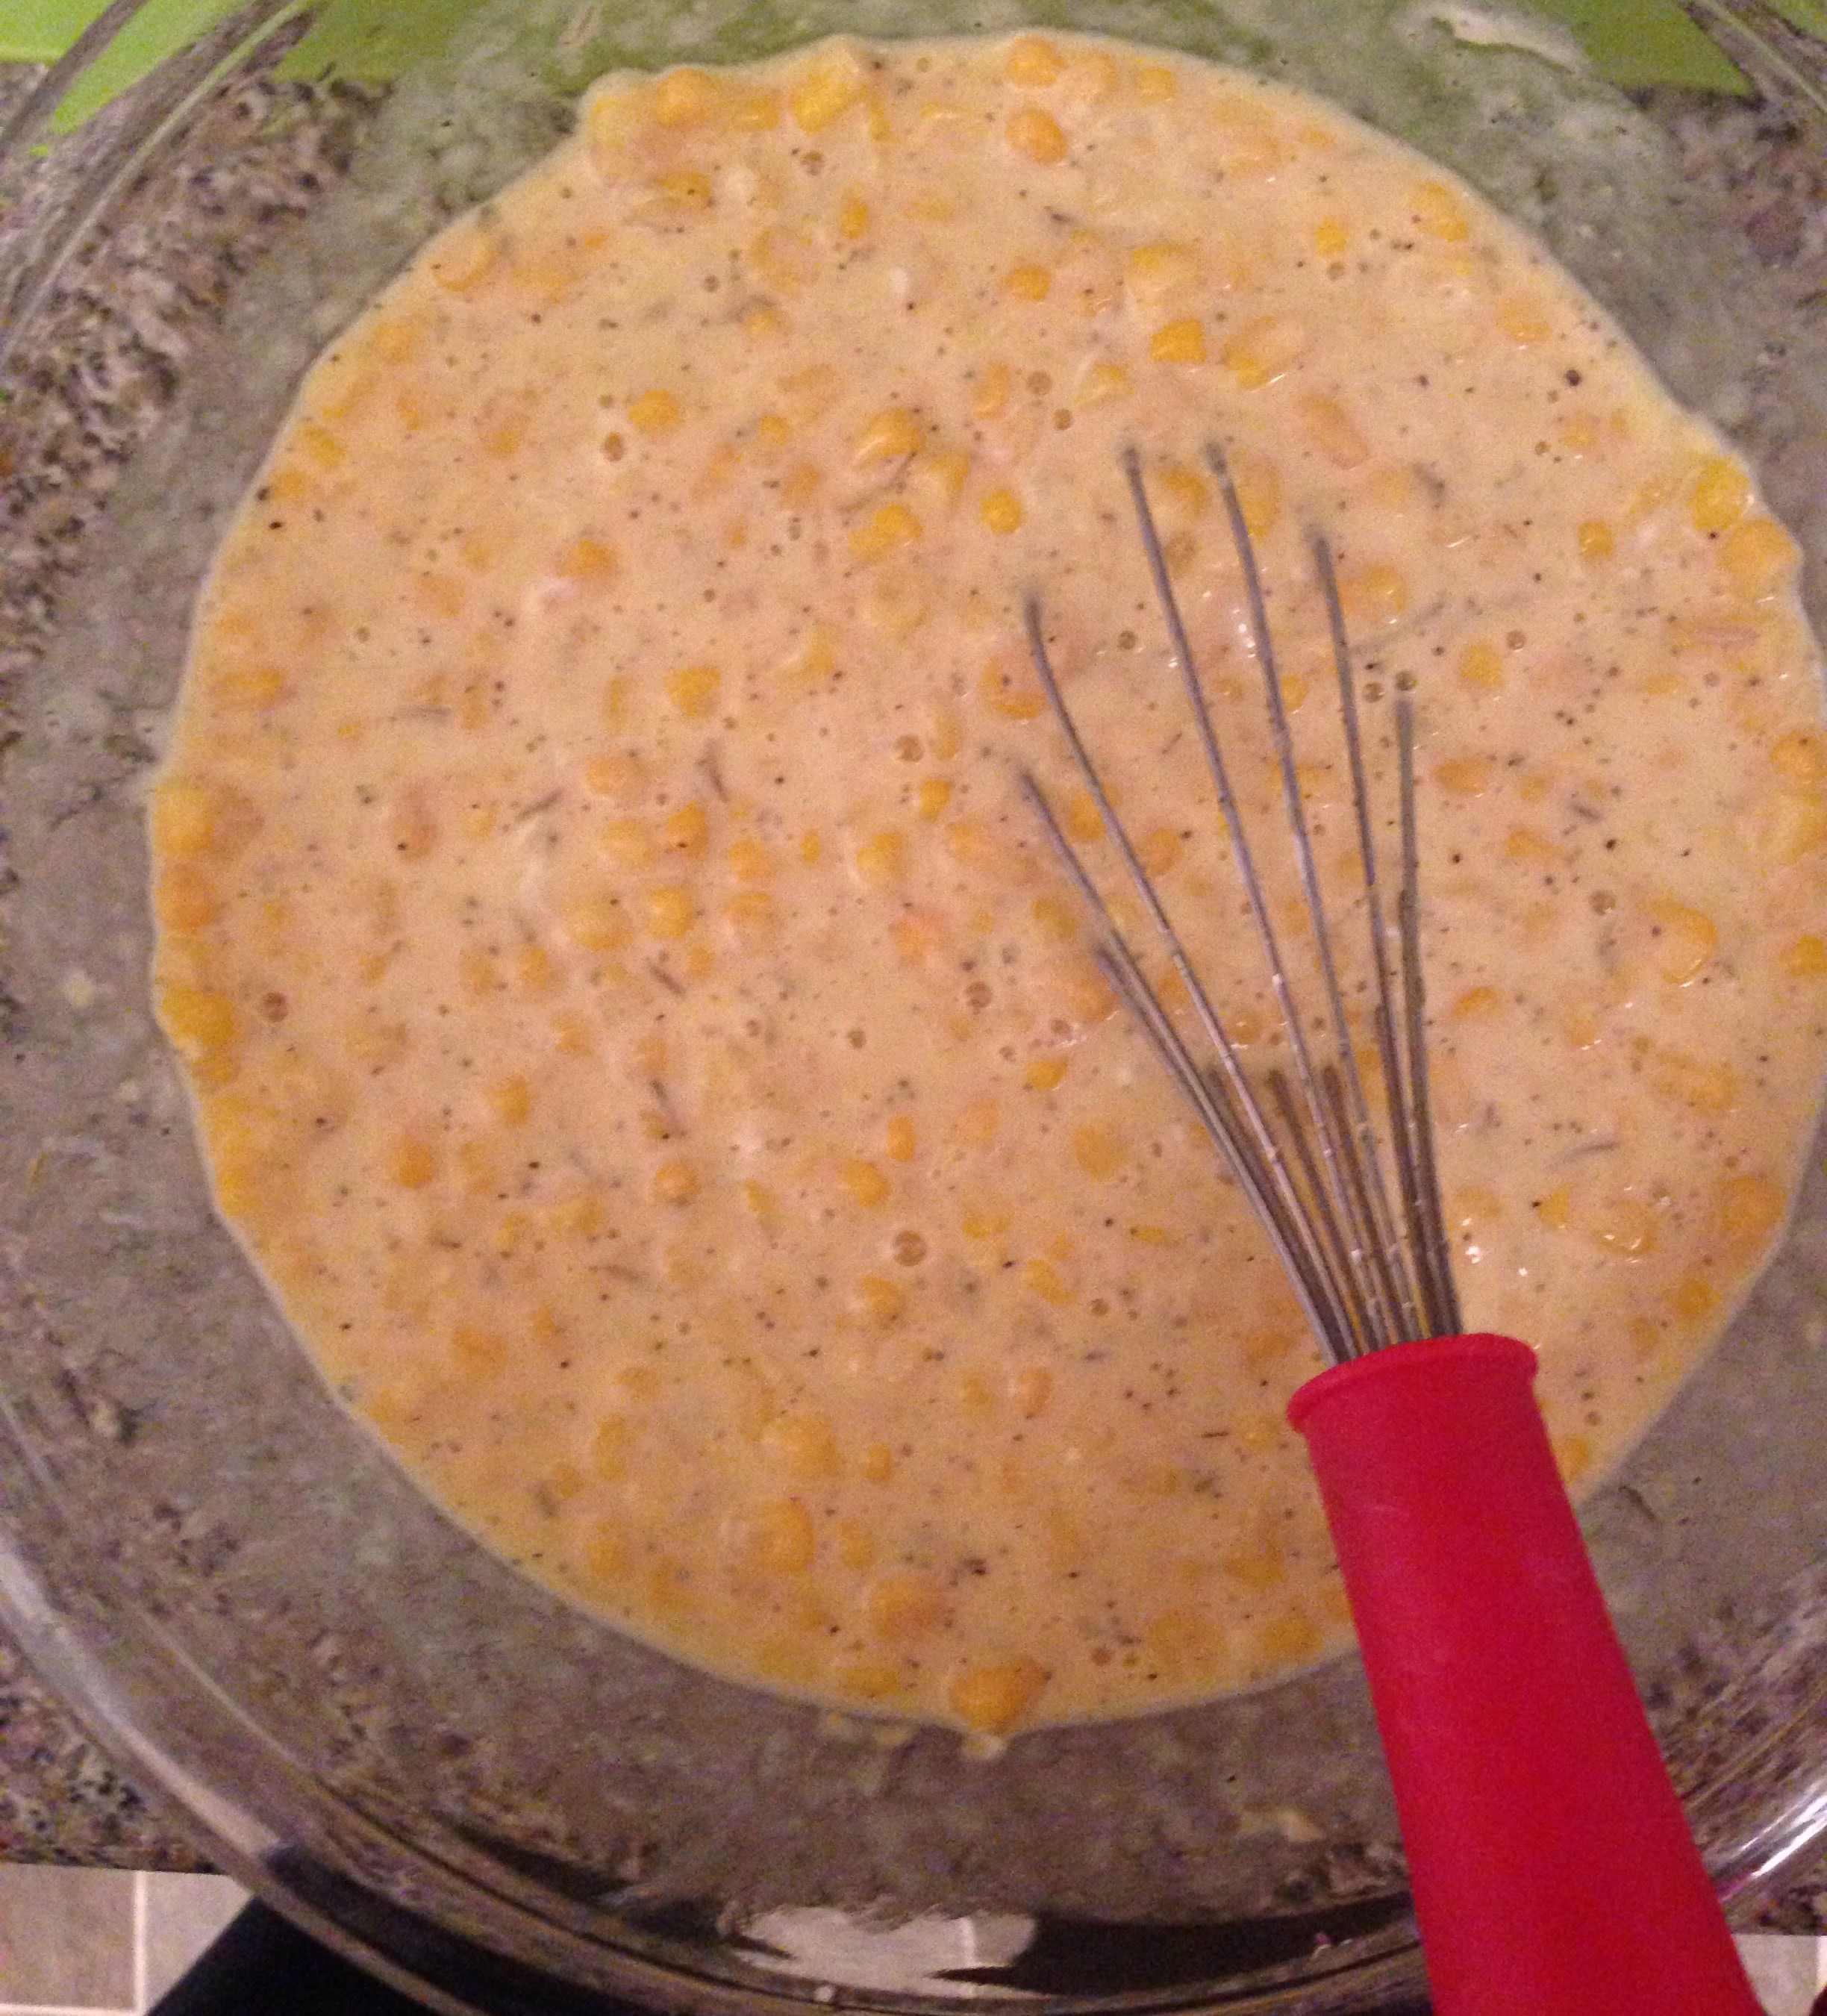 Adding corn and spices